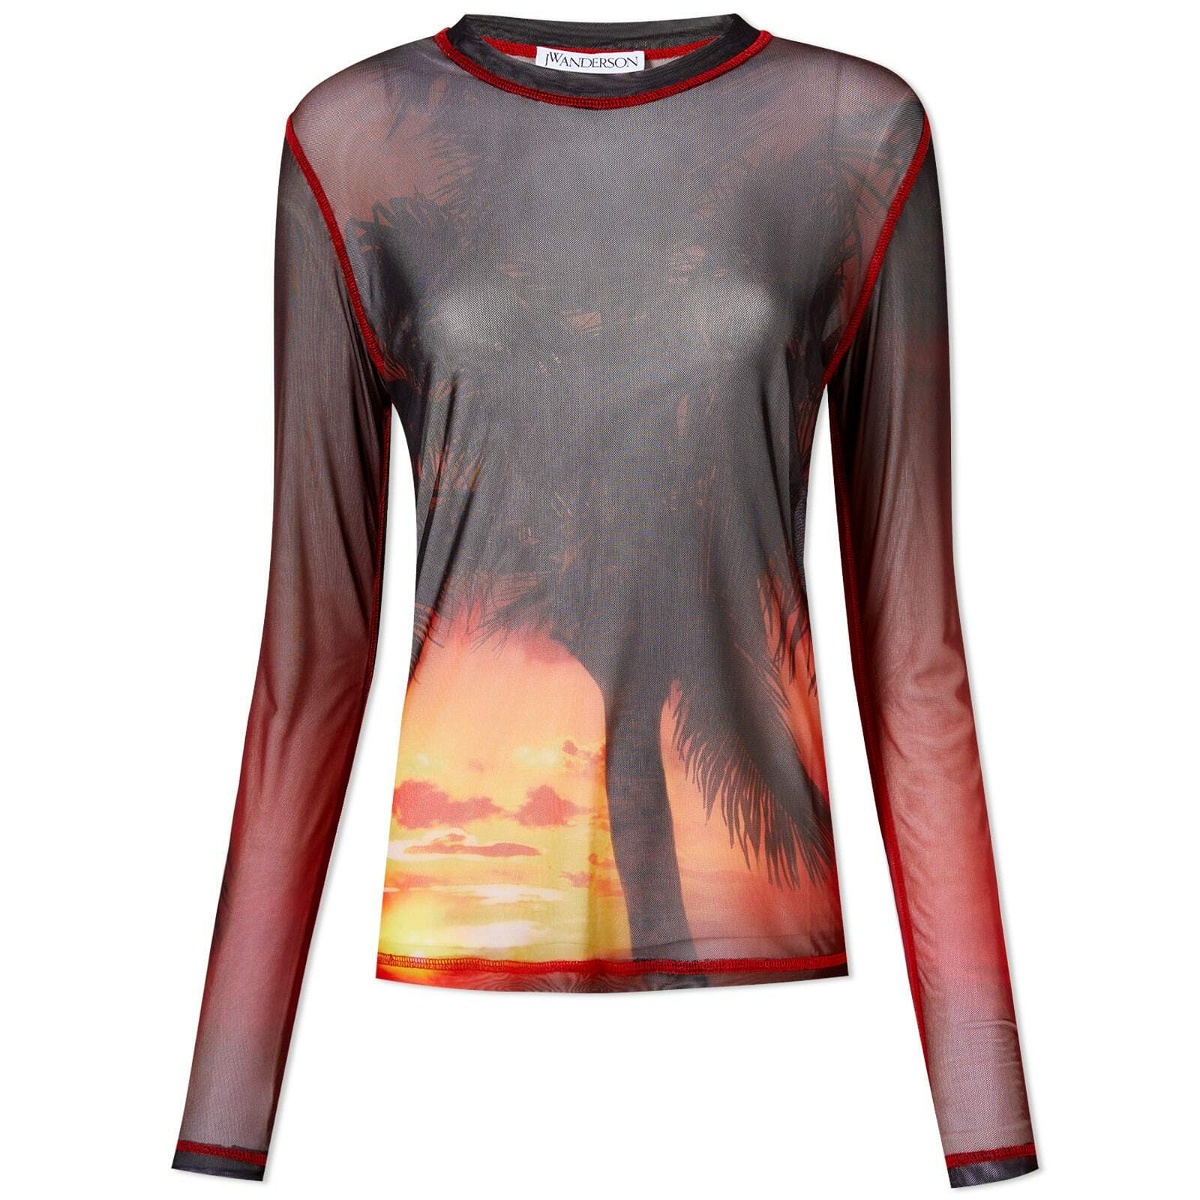 JW Anderson Women's Long Sleeve Sunset Underpinning Top in Red JW Anderson